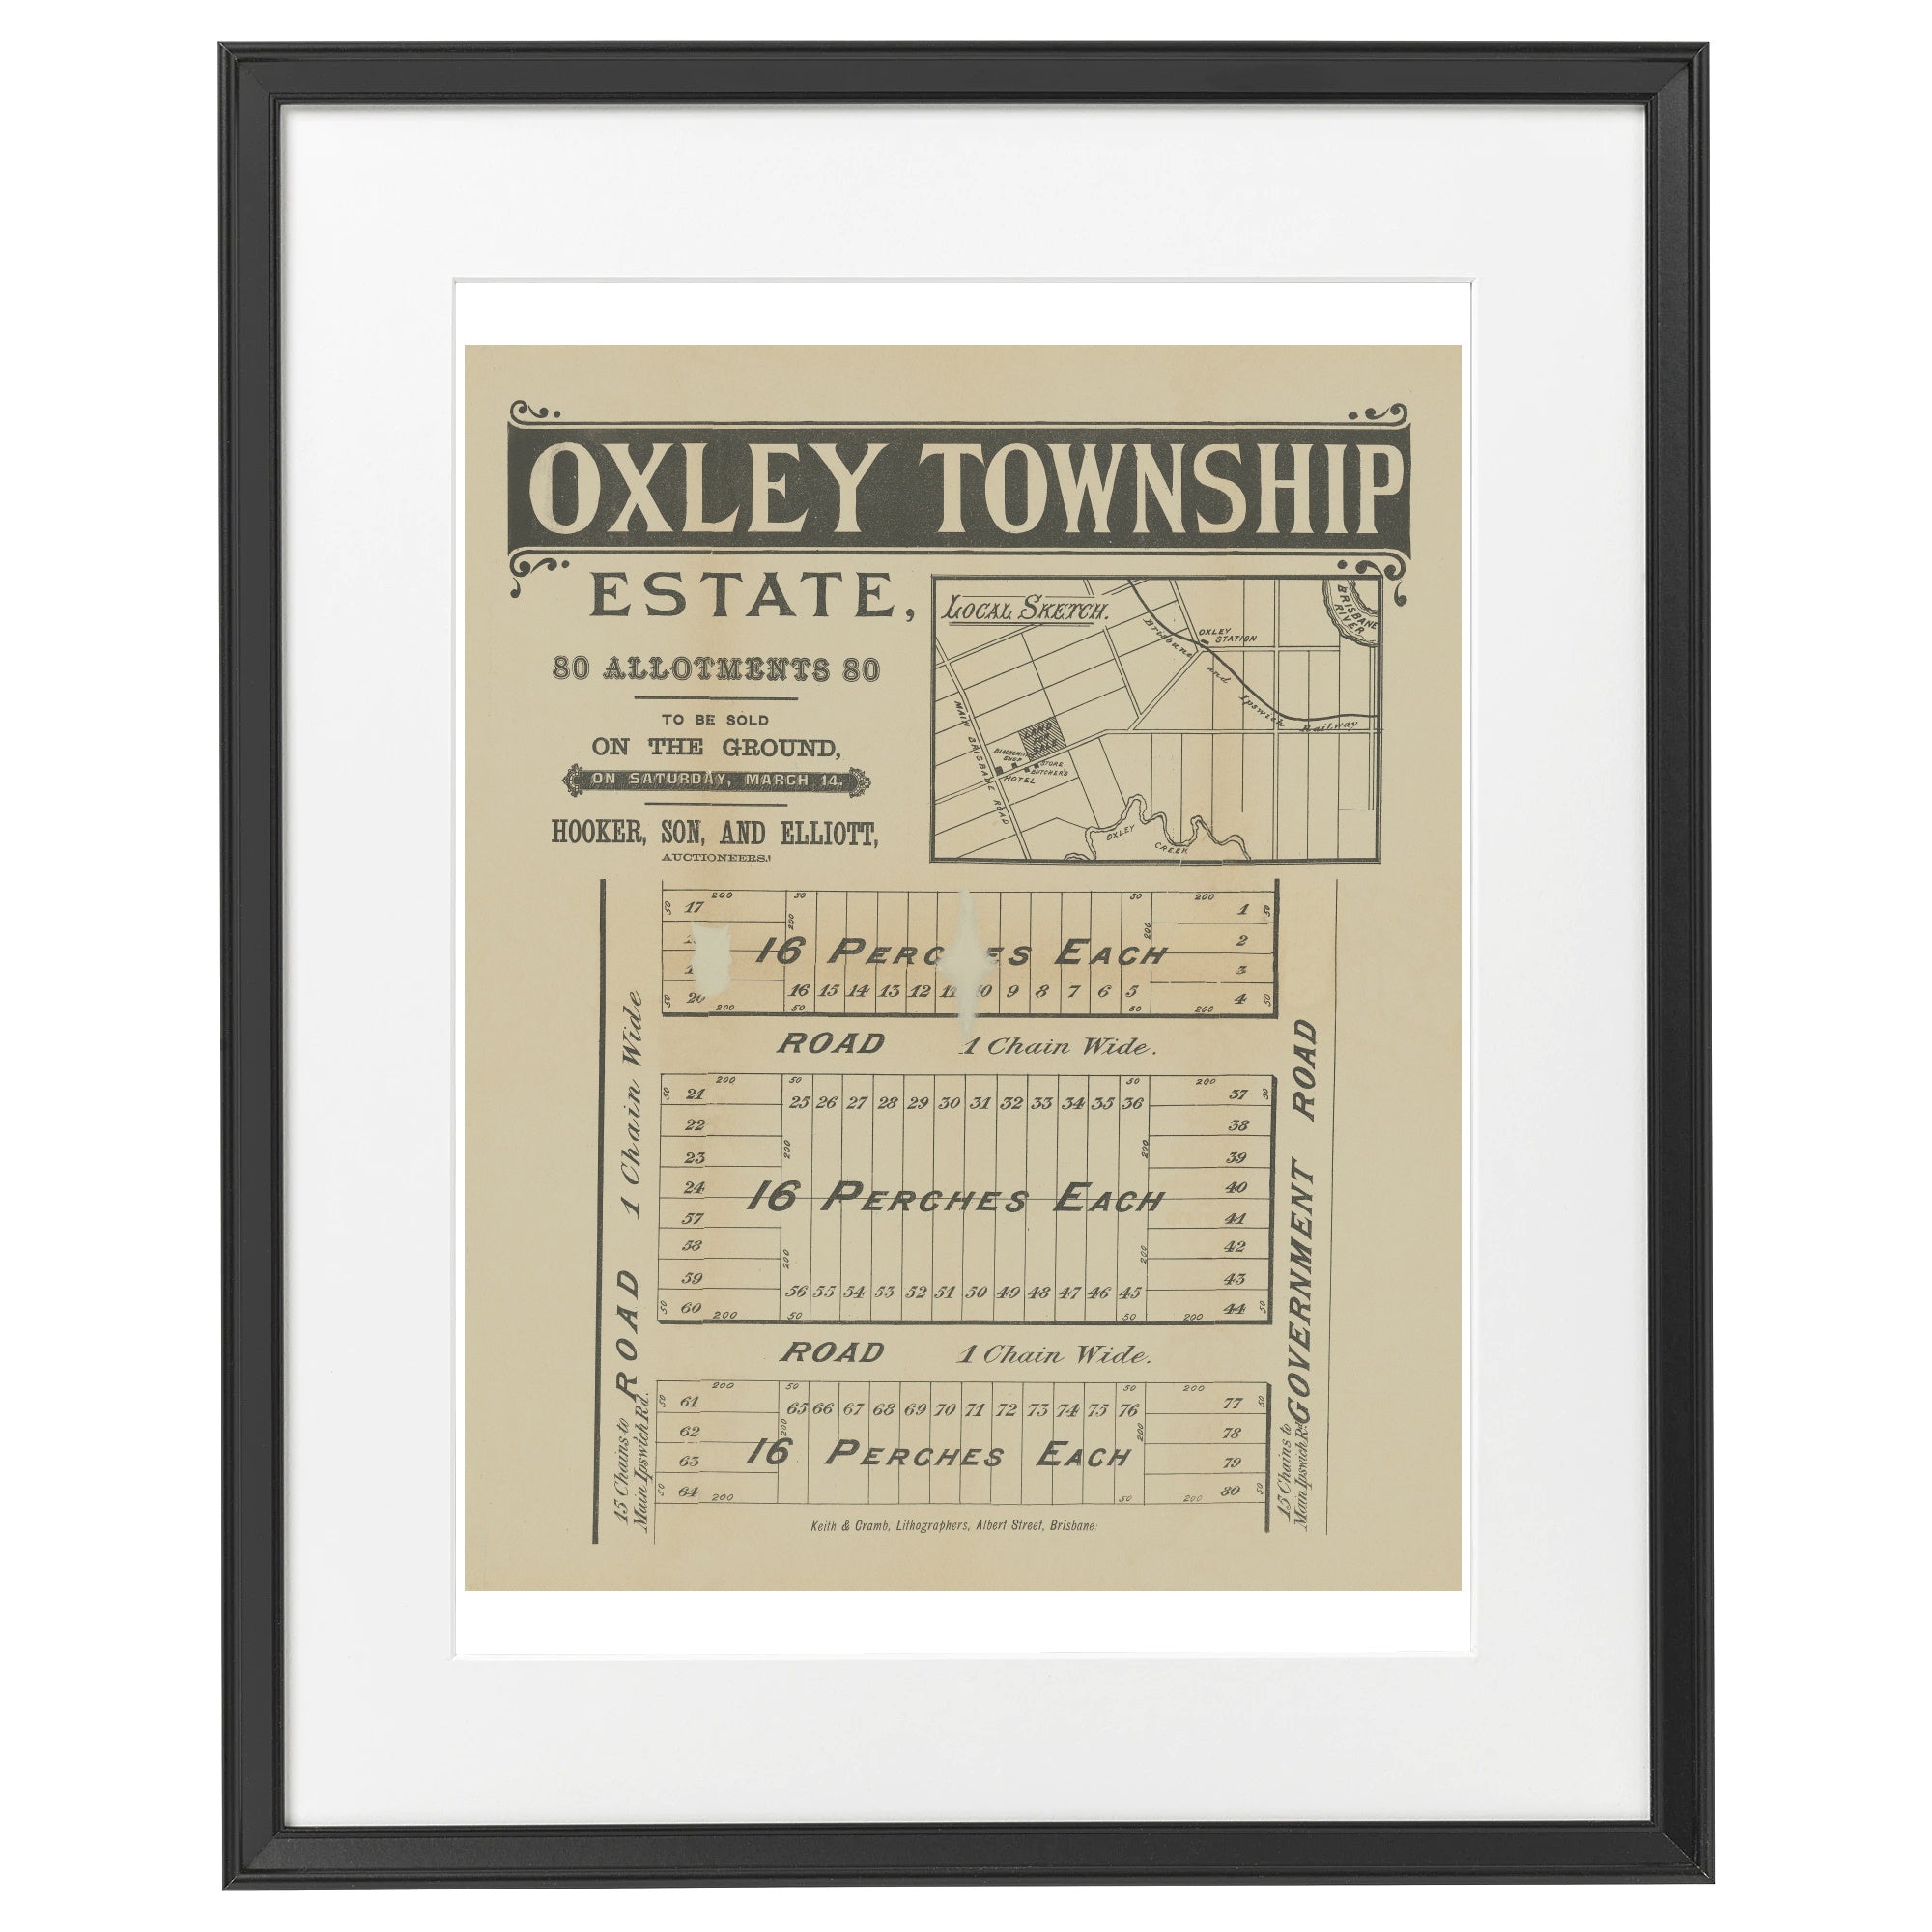 1885 Oxley Township Estate - 135 years old today